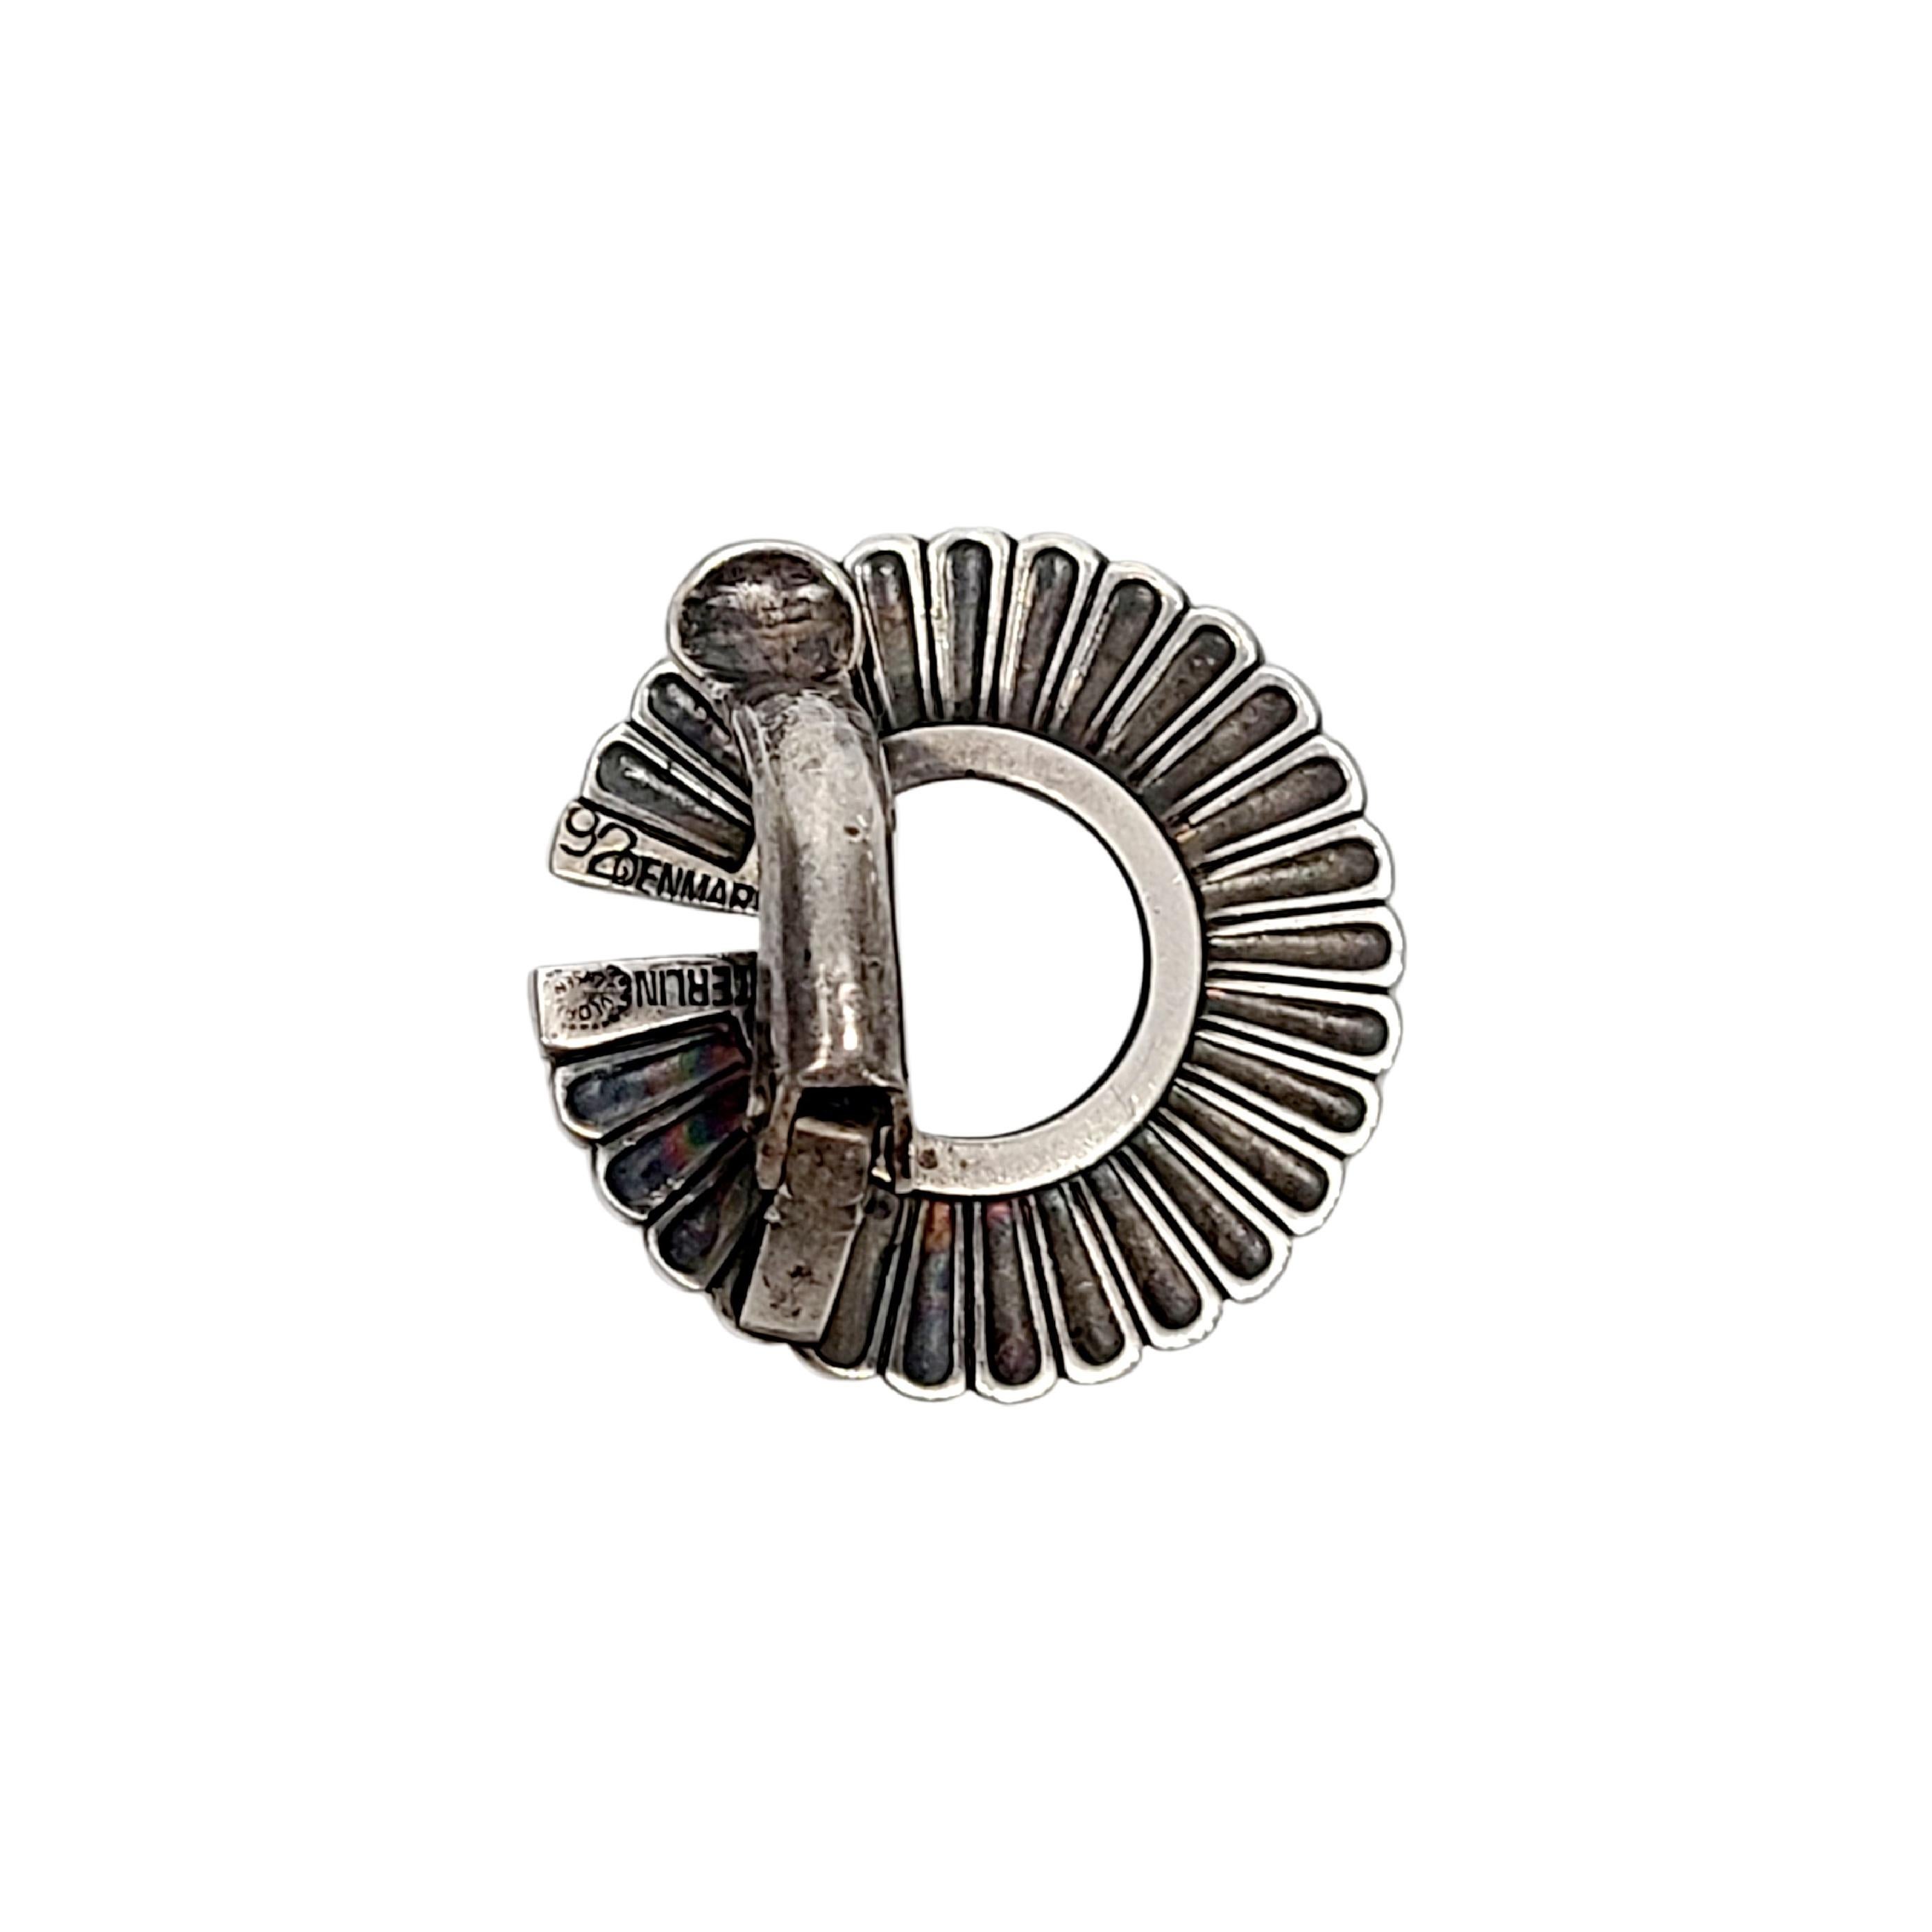 Georg Jensen sterling silver #92 clip-on single earring.

This beautiful earring features a round collar-like design.

Measures 7/8